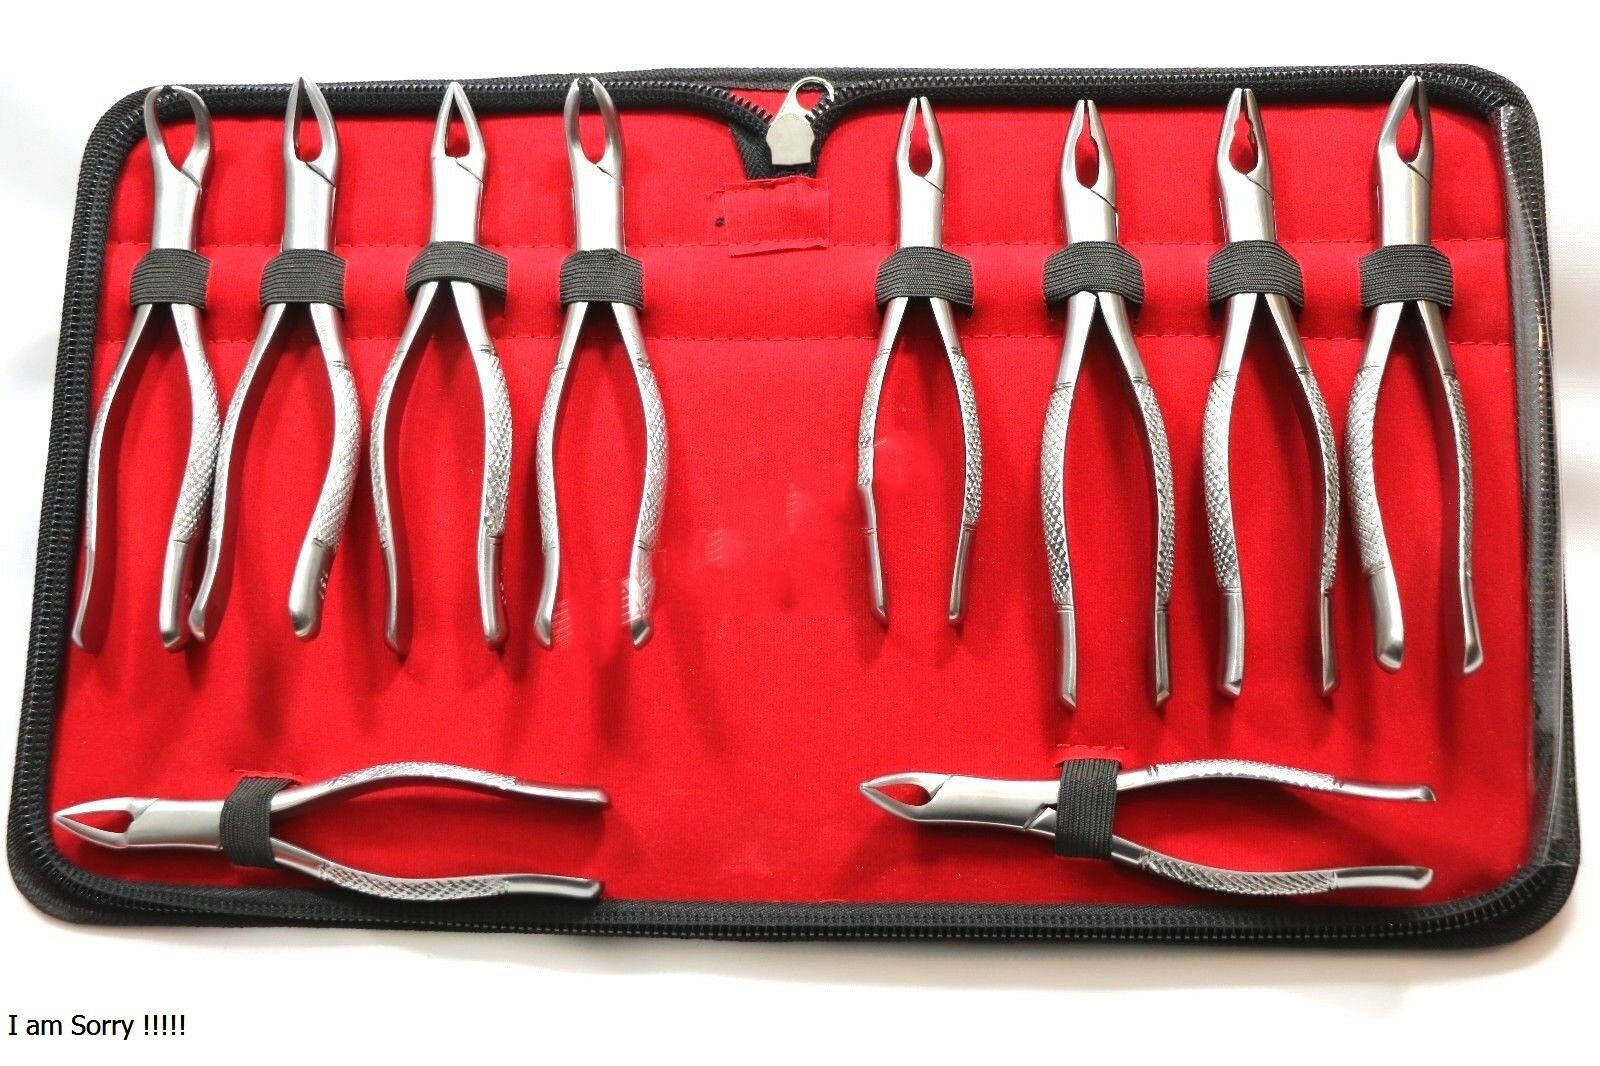 GERMAN-STAINLESS-EXTRACTING-FORCEPS-EXTRACTION-DENTAL-INSTRUMENTS-SET-OF-10-EA.jpg